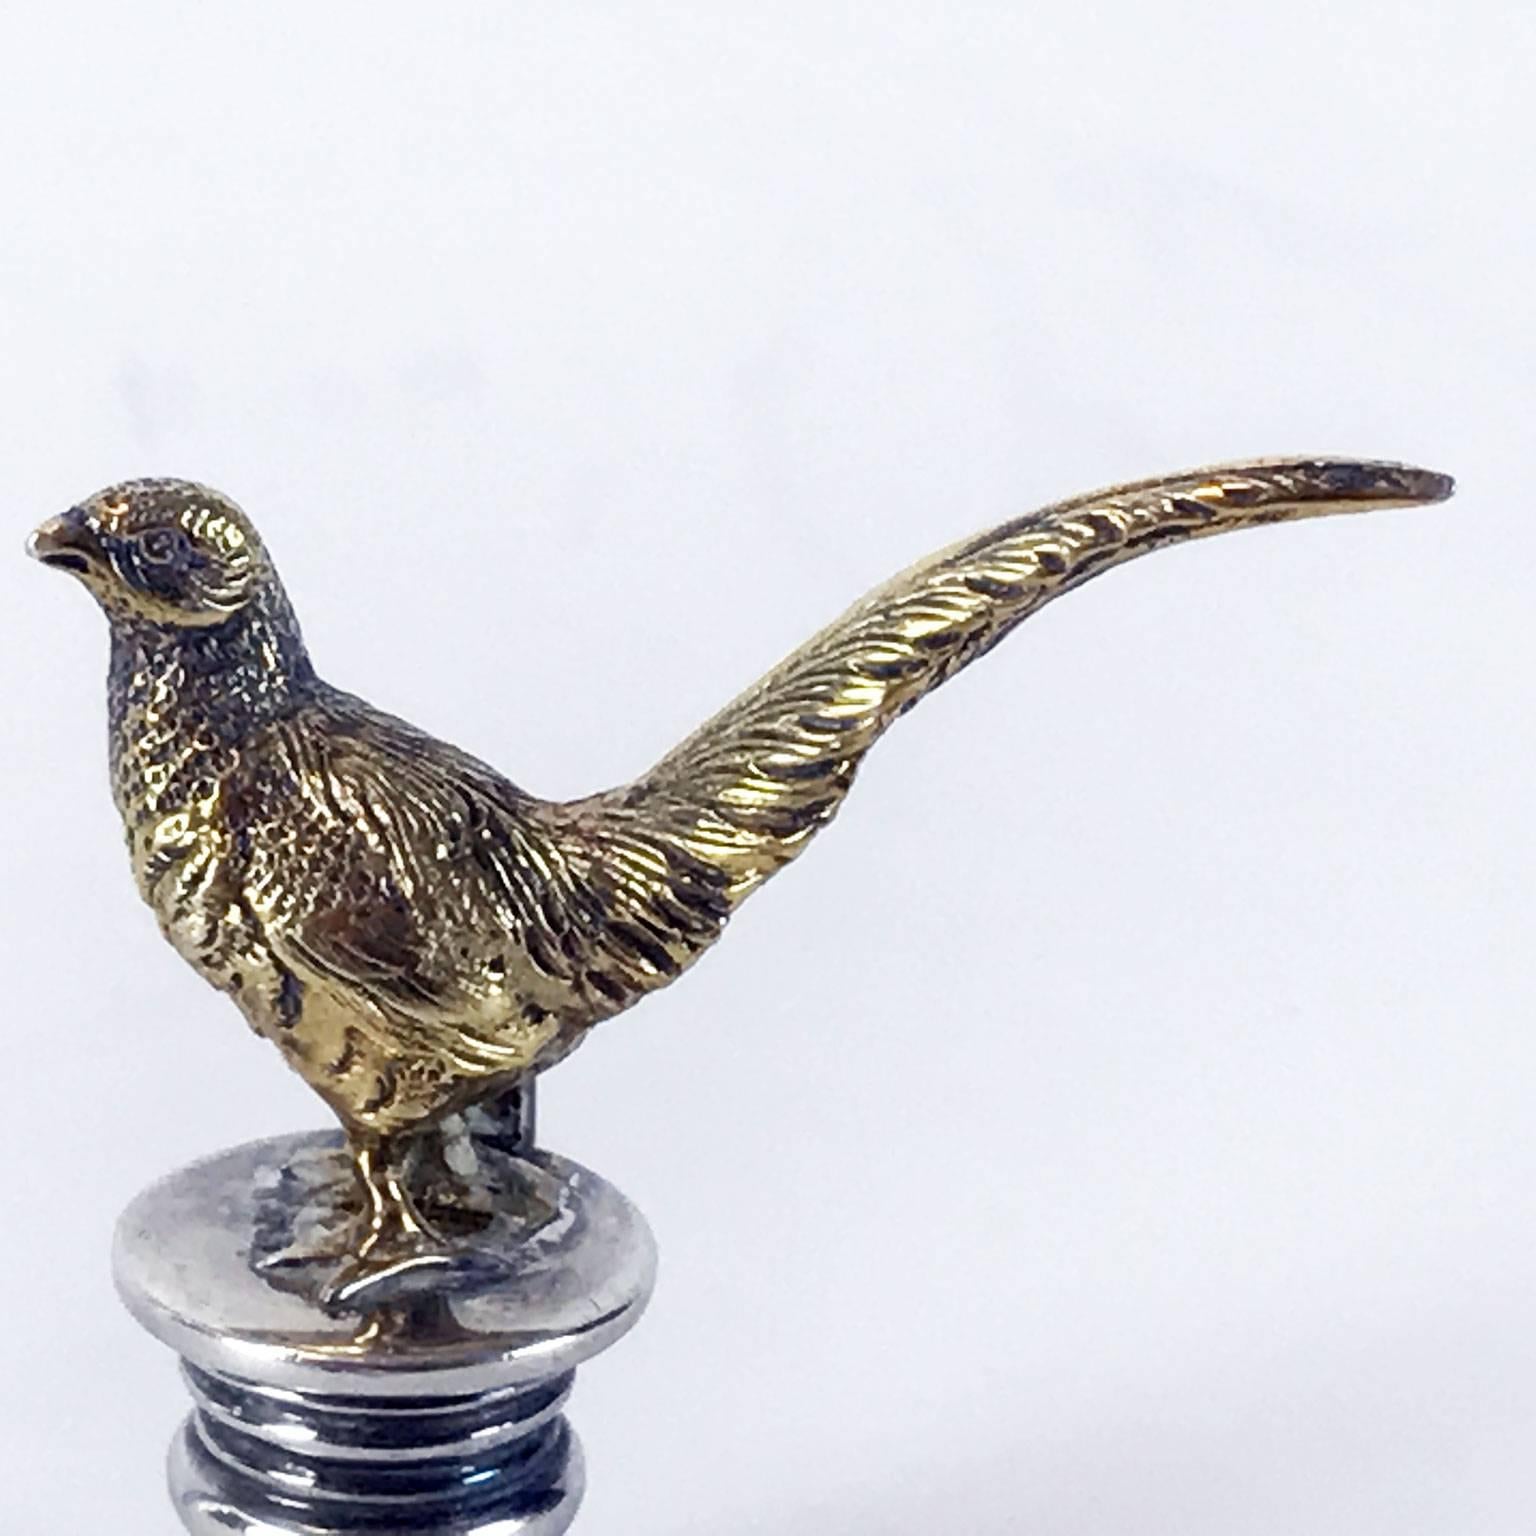 British Set of Four Birds Place Card Holders Sterling Silver by E H W & Co London 1914